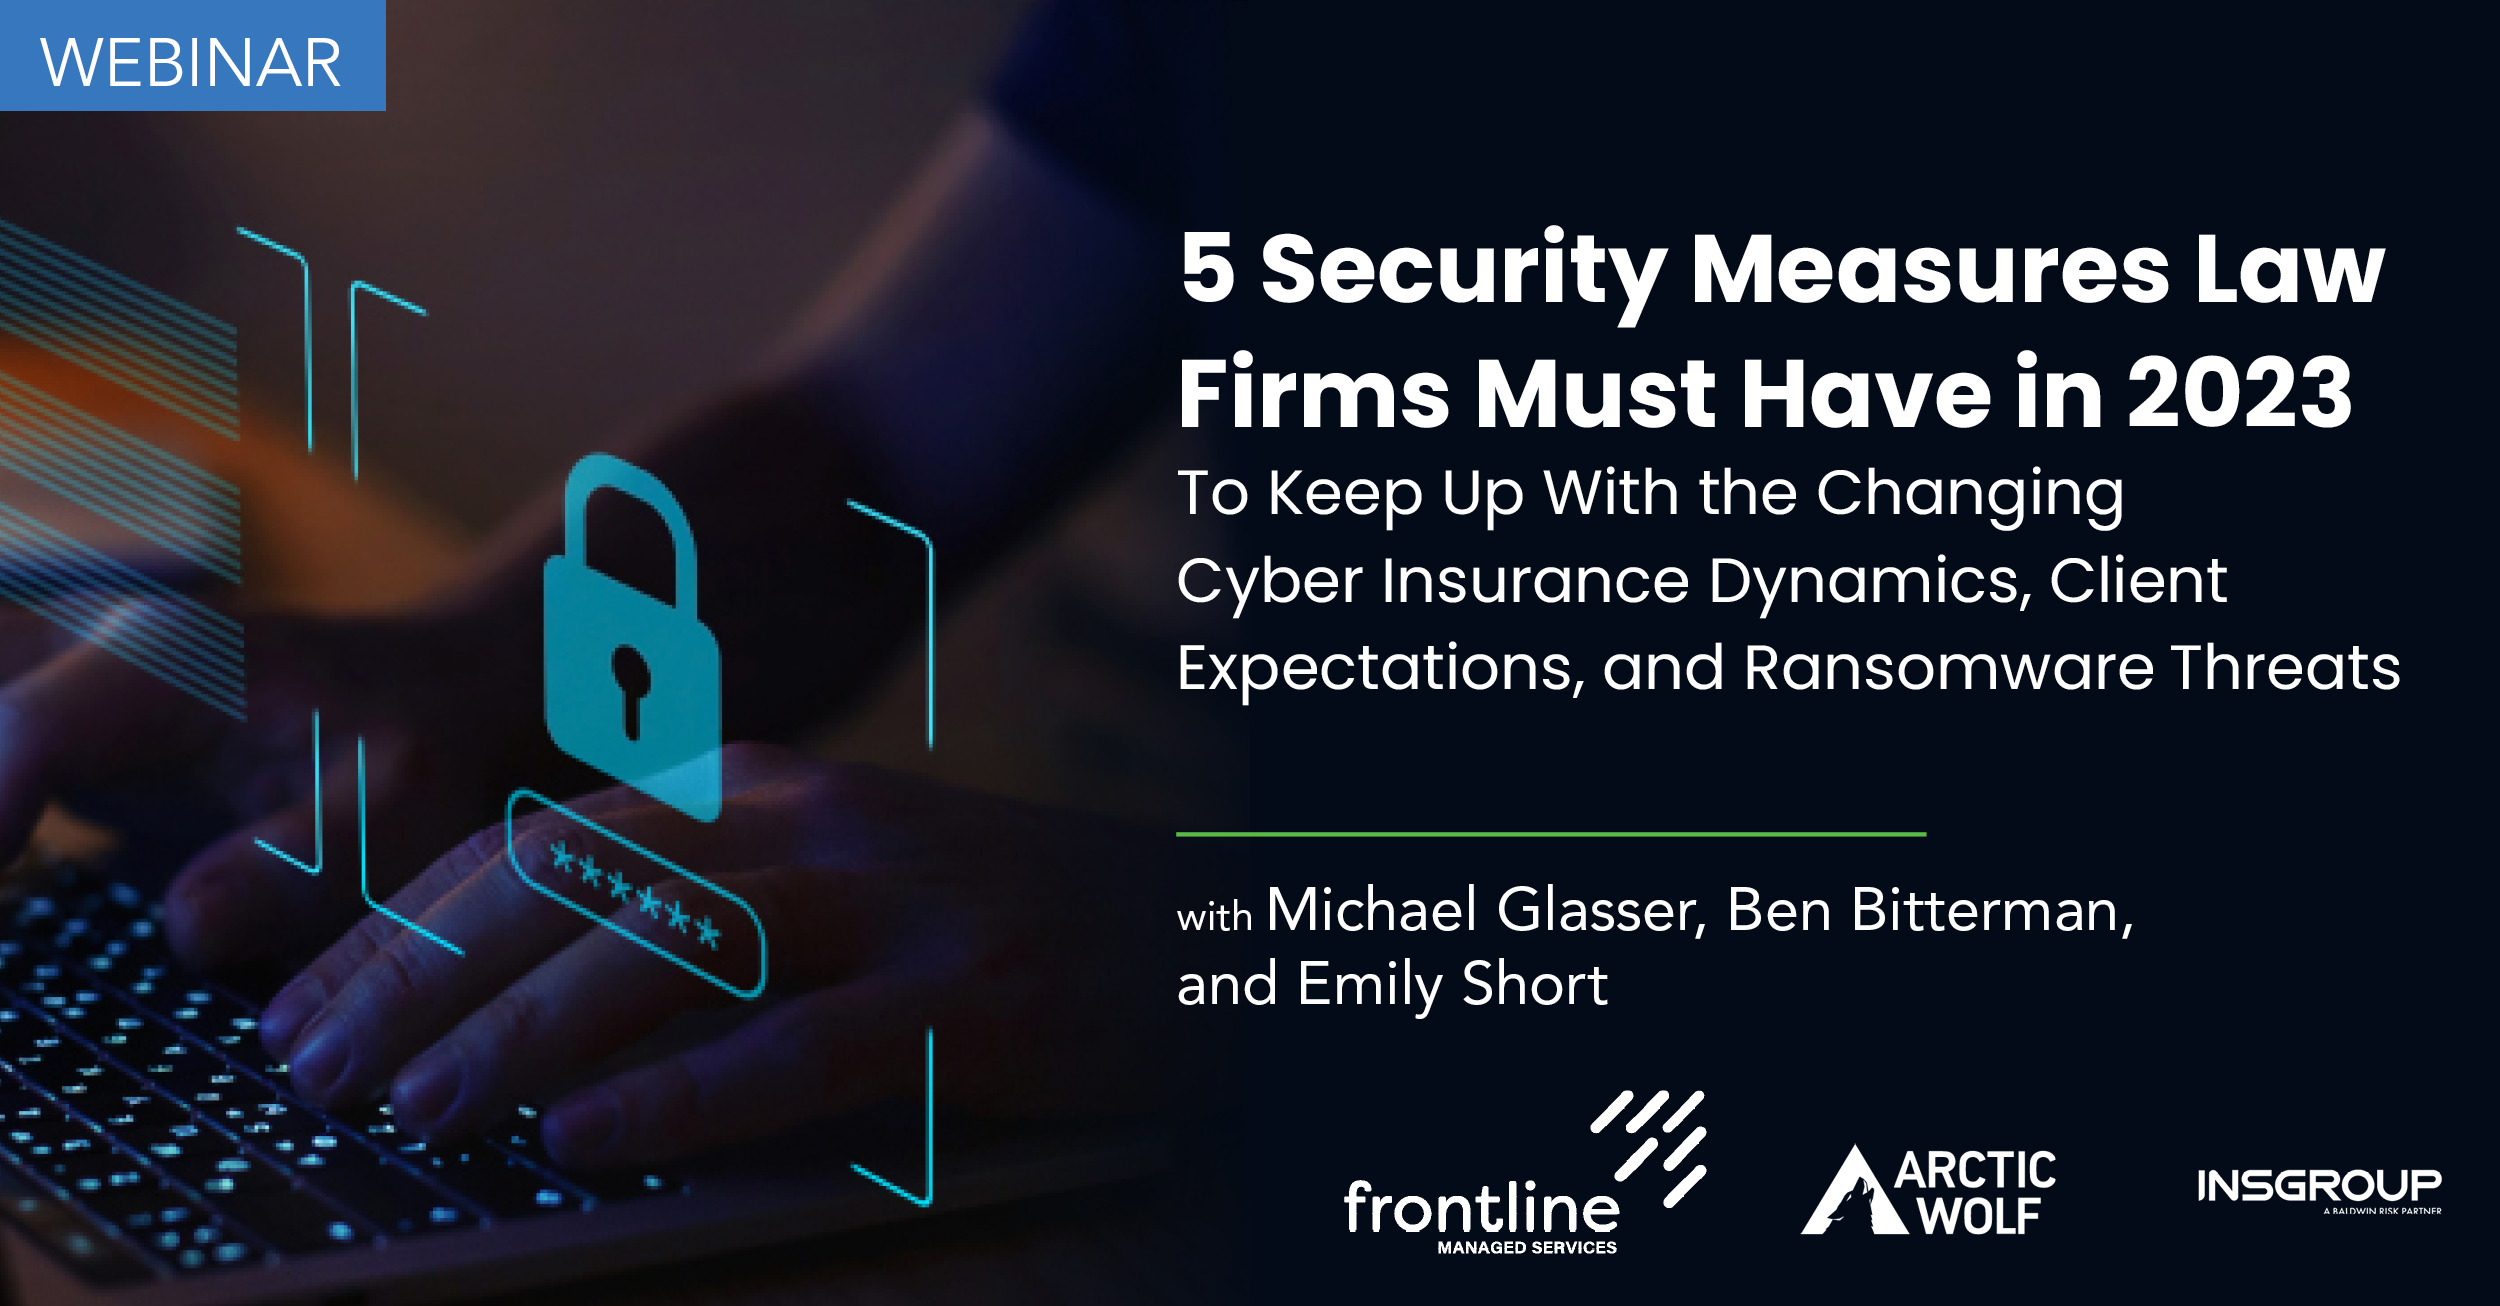 fms-webinar-5-cyber-security-measures-for-law-firms-1